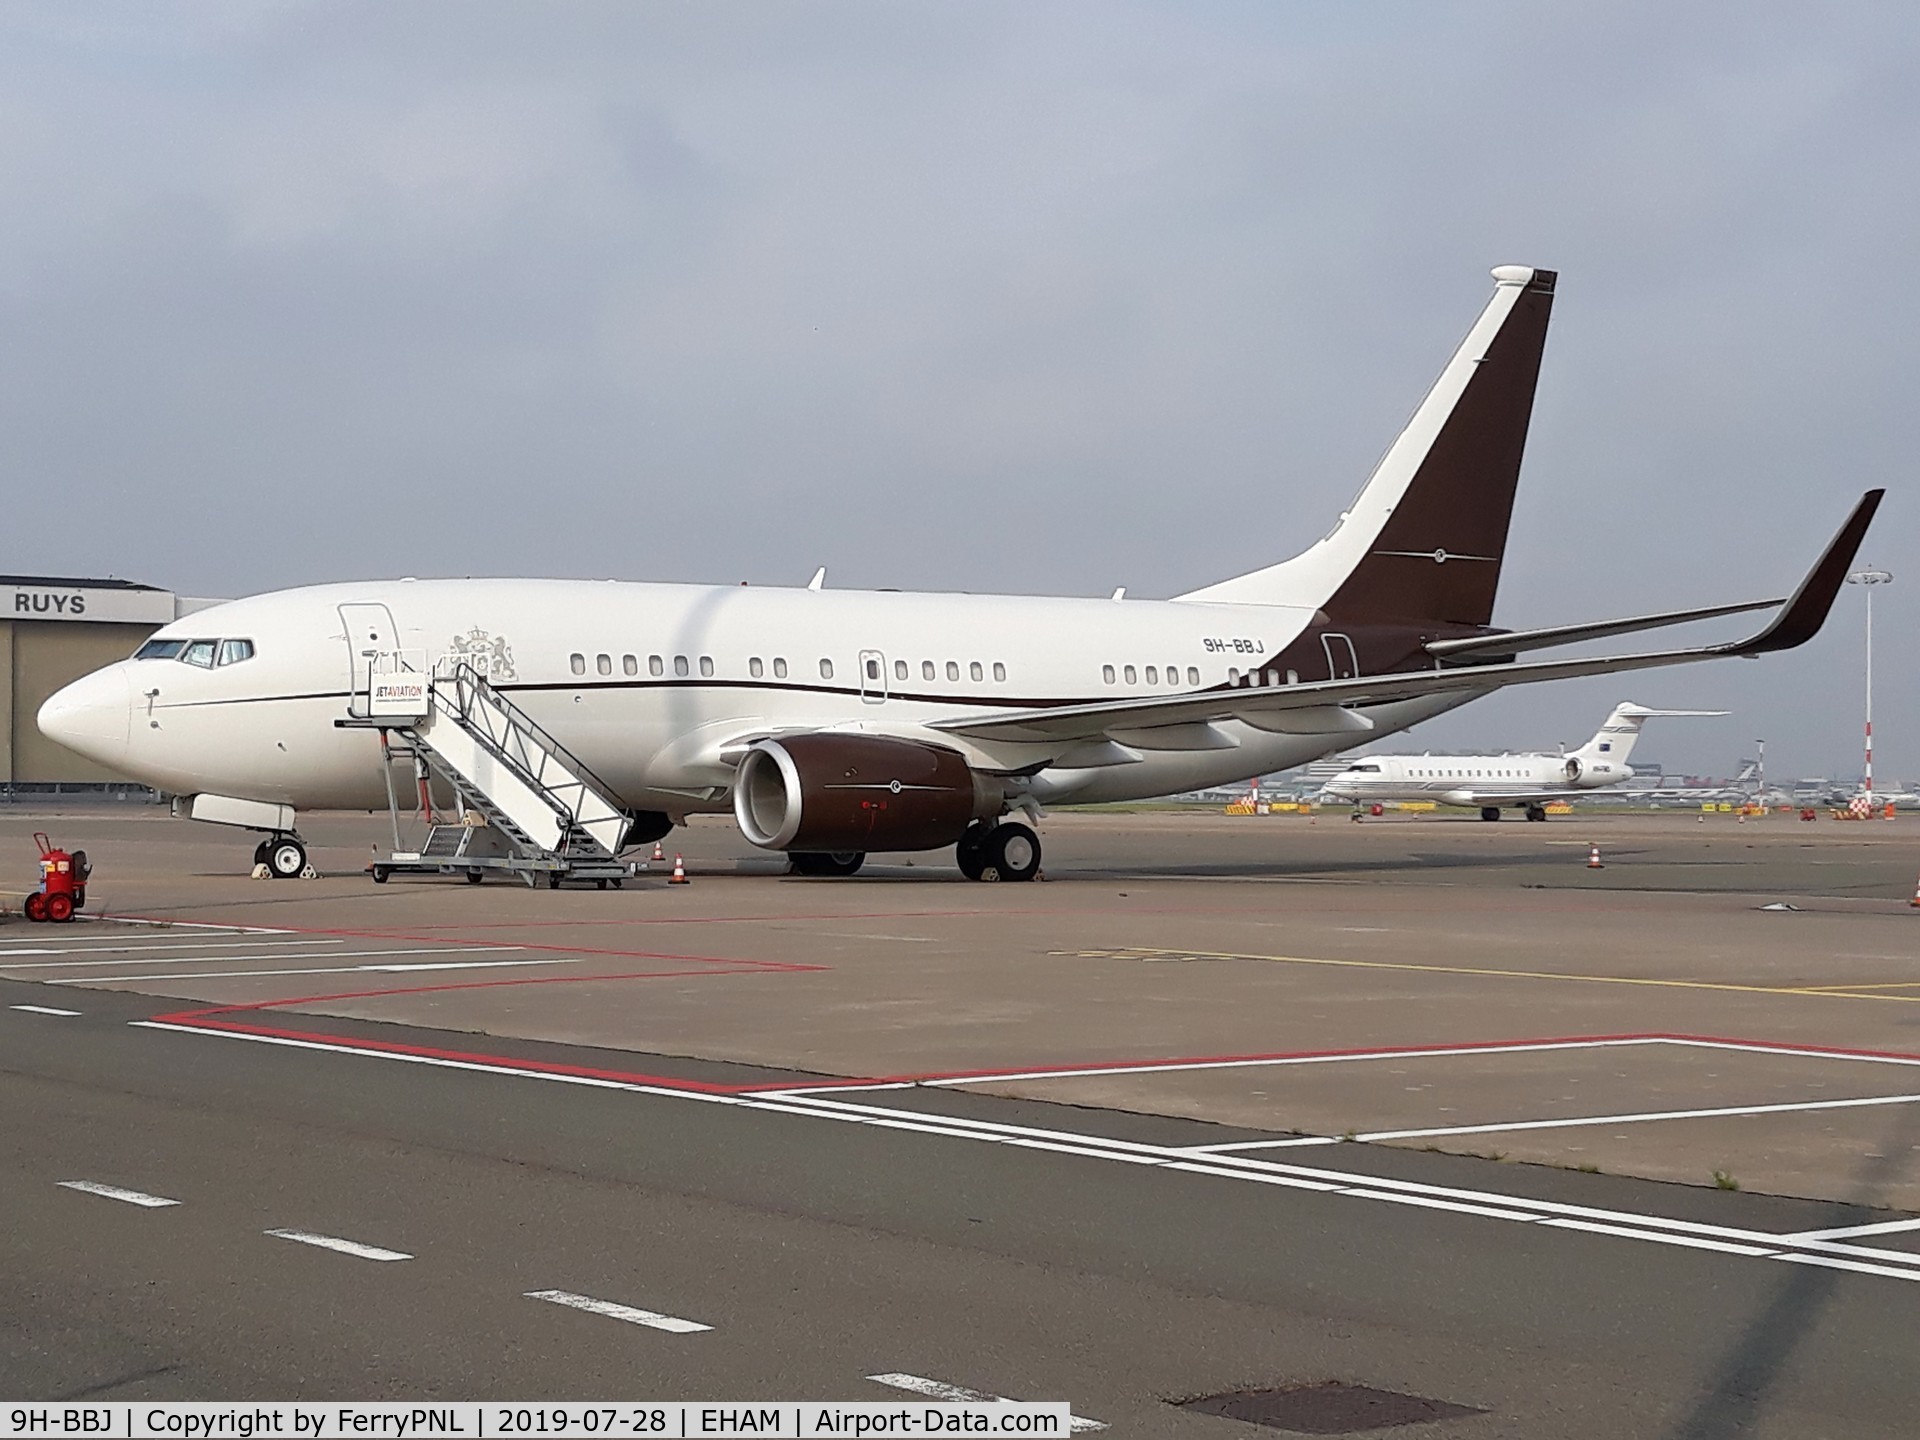 9H-BBJ, 2000 Boeing 737-7BC C/N 30791, BBJ waiting for its ferry flight back to its lessor now that Dutch government BBJ has been delivered.